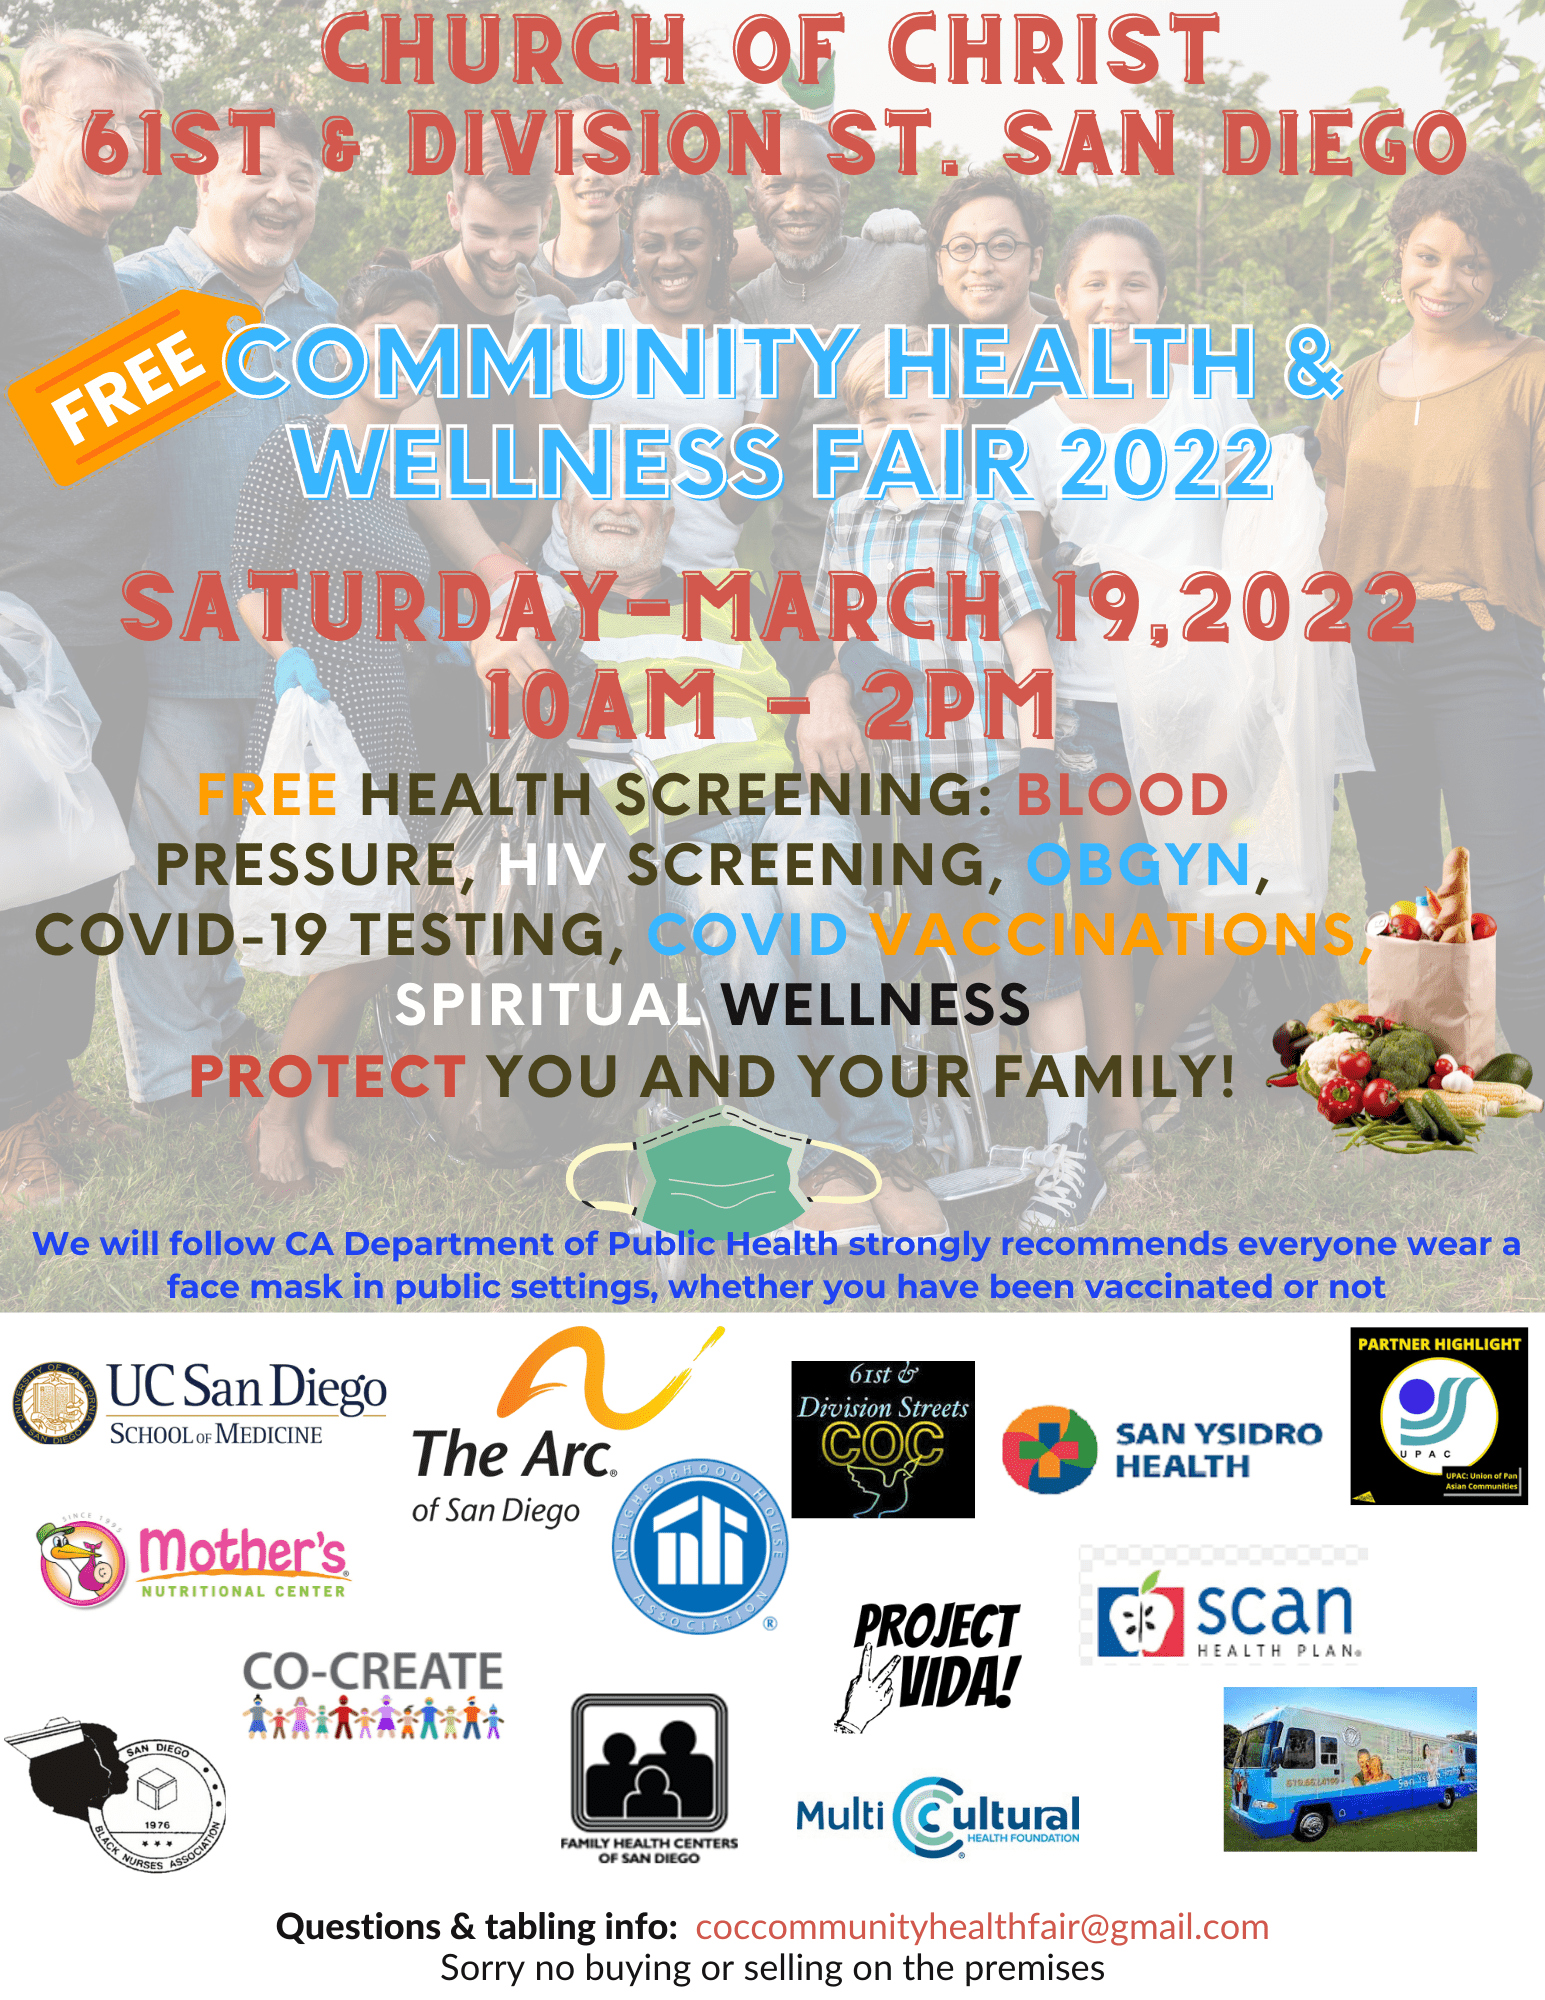 Health and Wellness Fair 61st and Division Streets Church of Christ